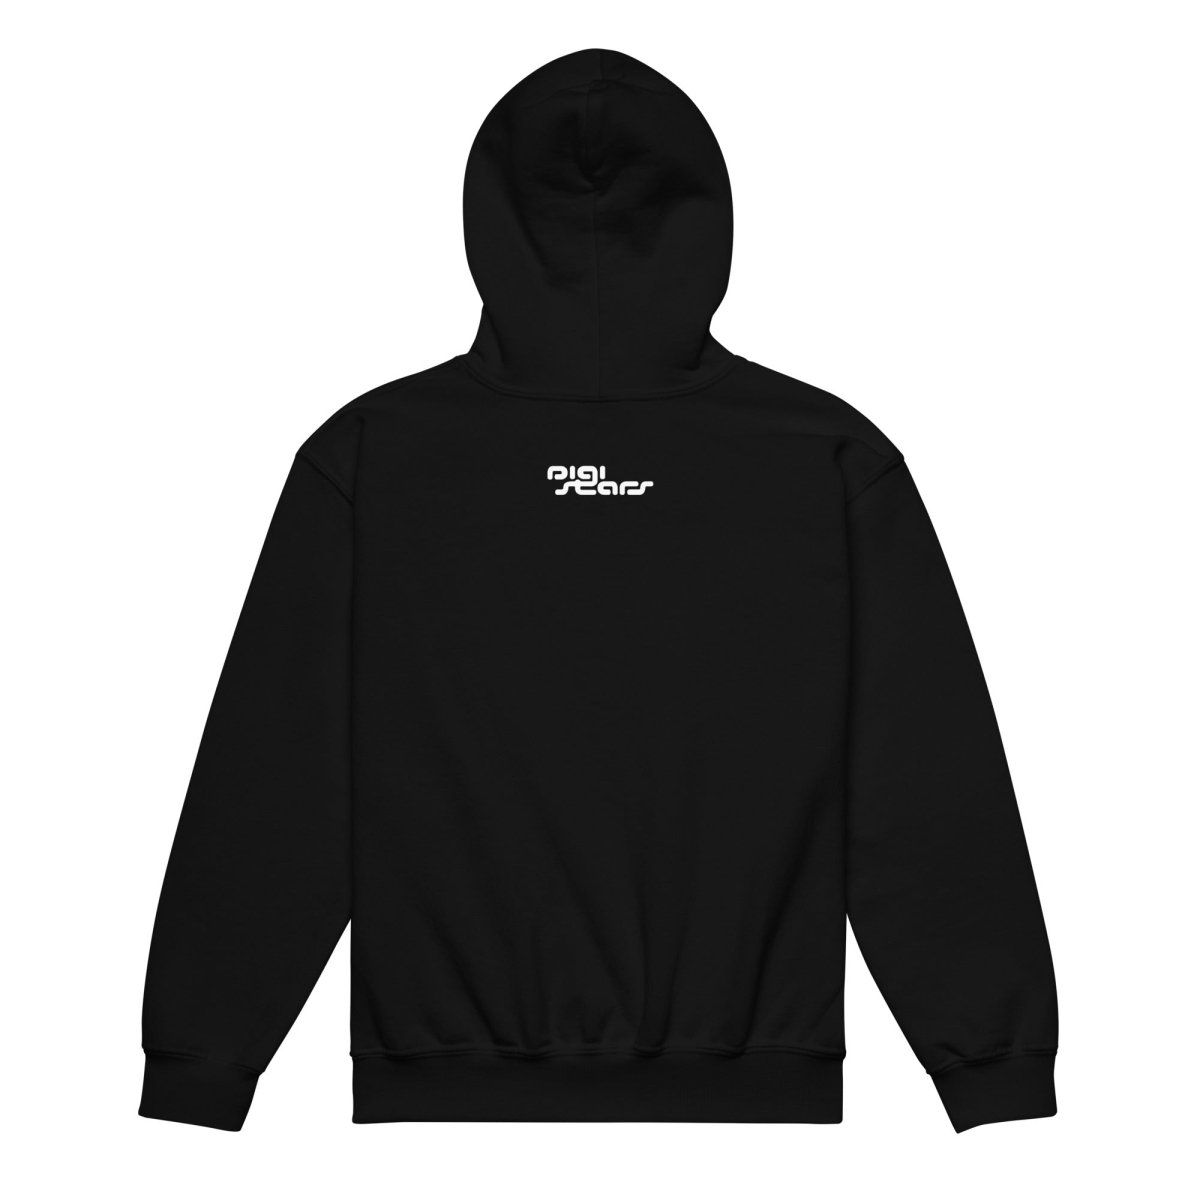 Youth heavy blend hoodie - digistars